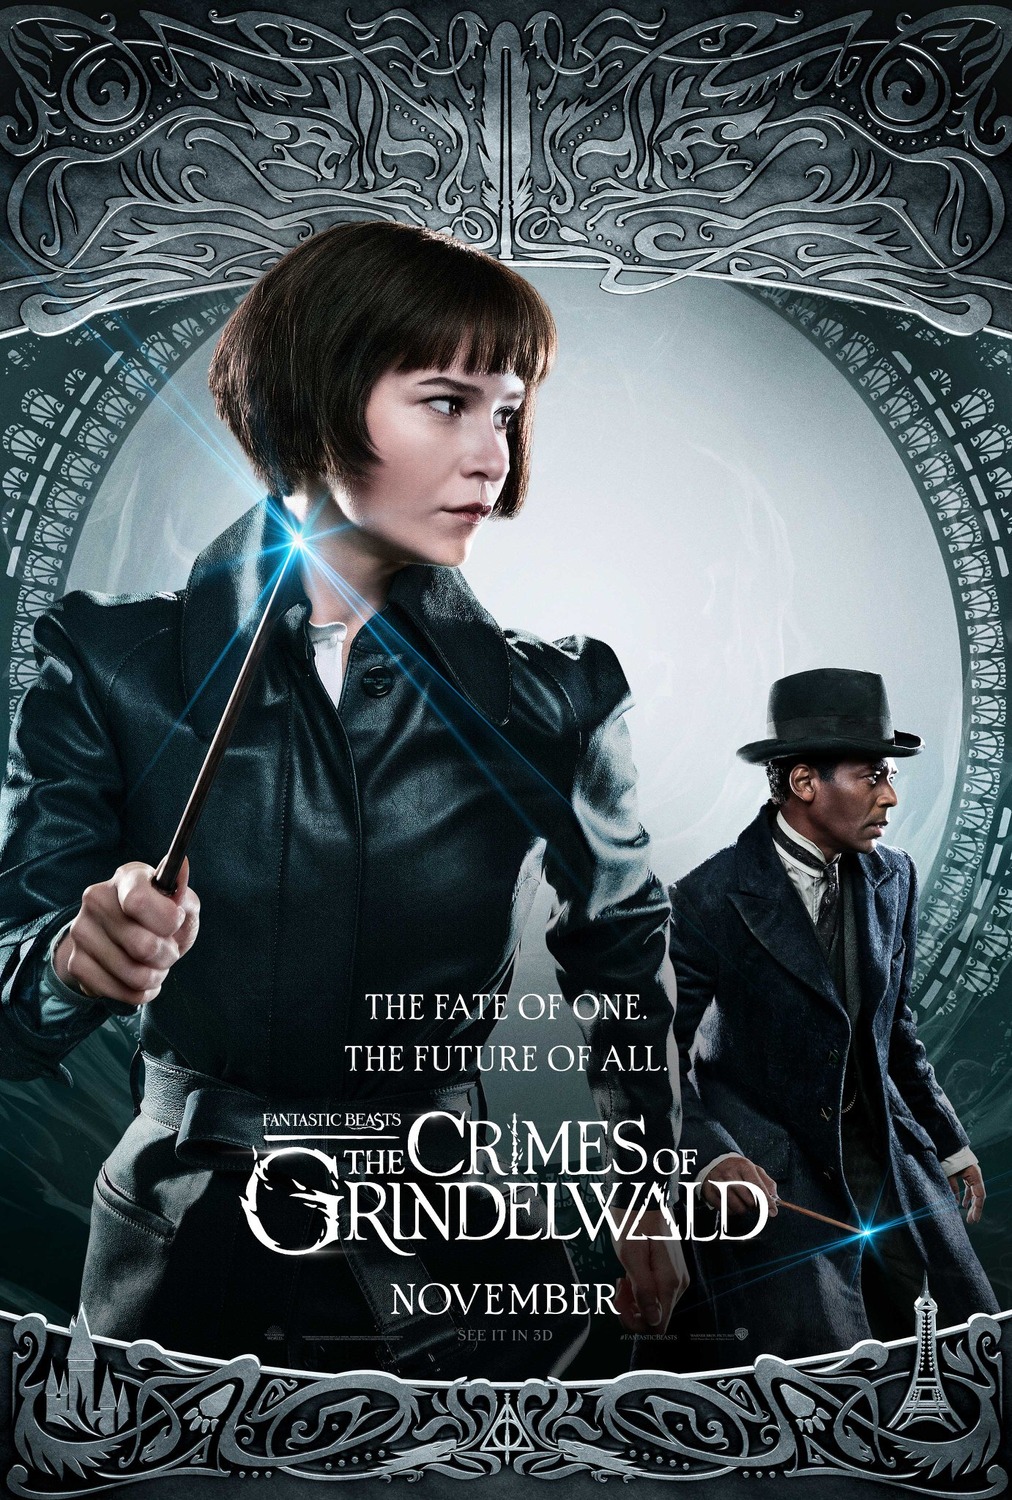 Extra Large Movie Poster Image for Fantastic Beasts: The Crimes of Grindelwald (#16 of 32)